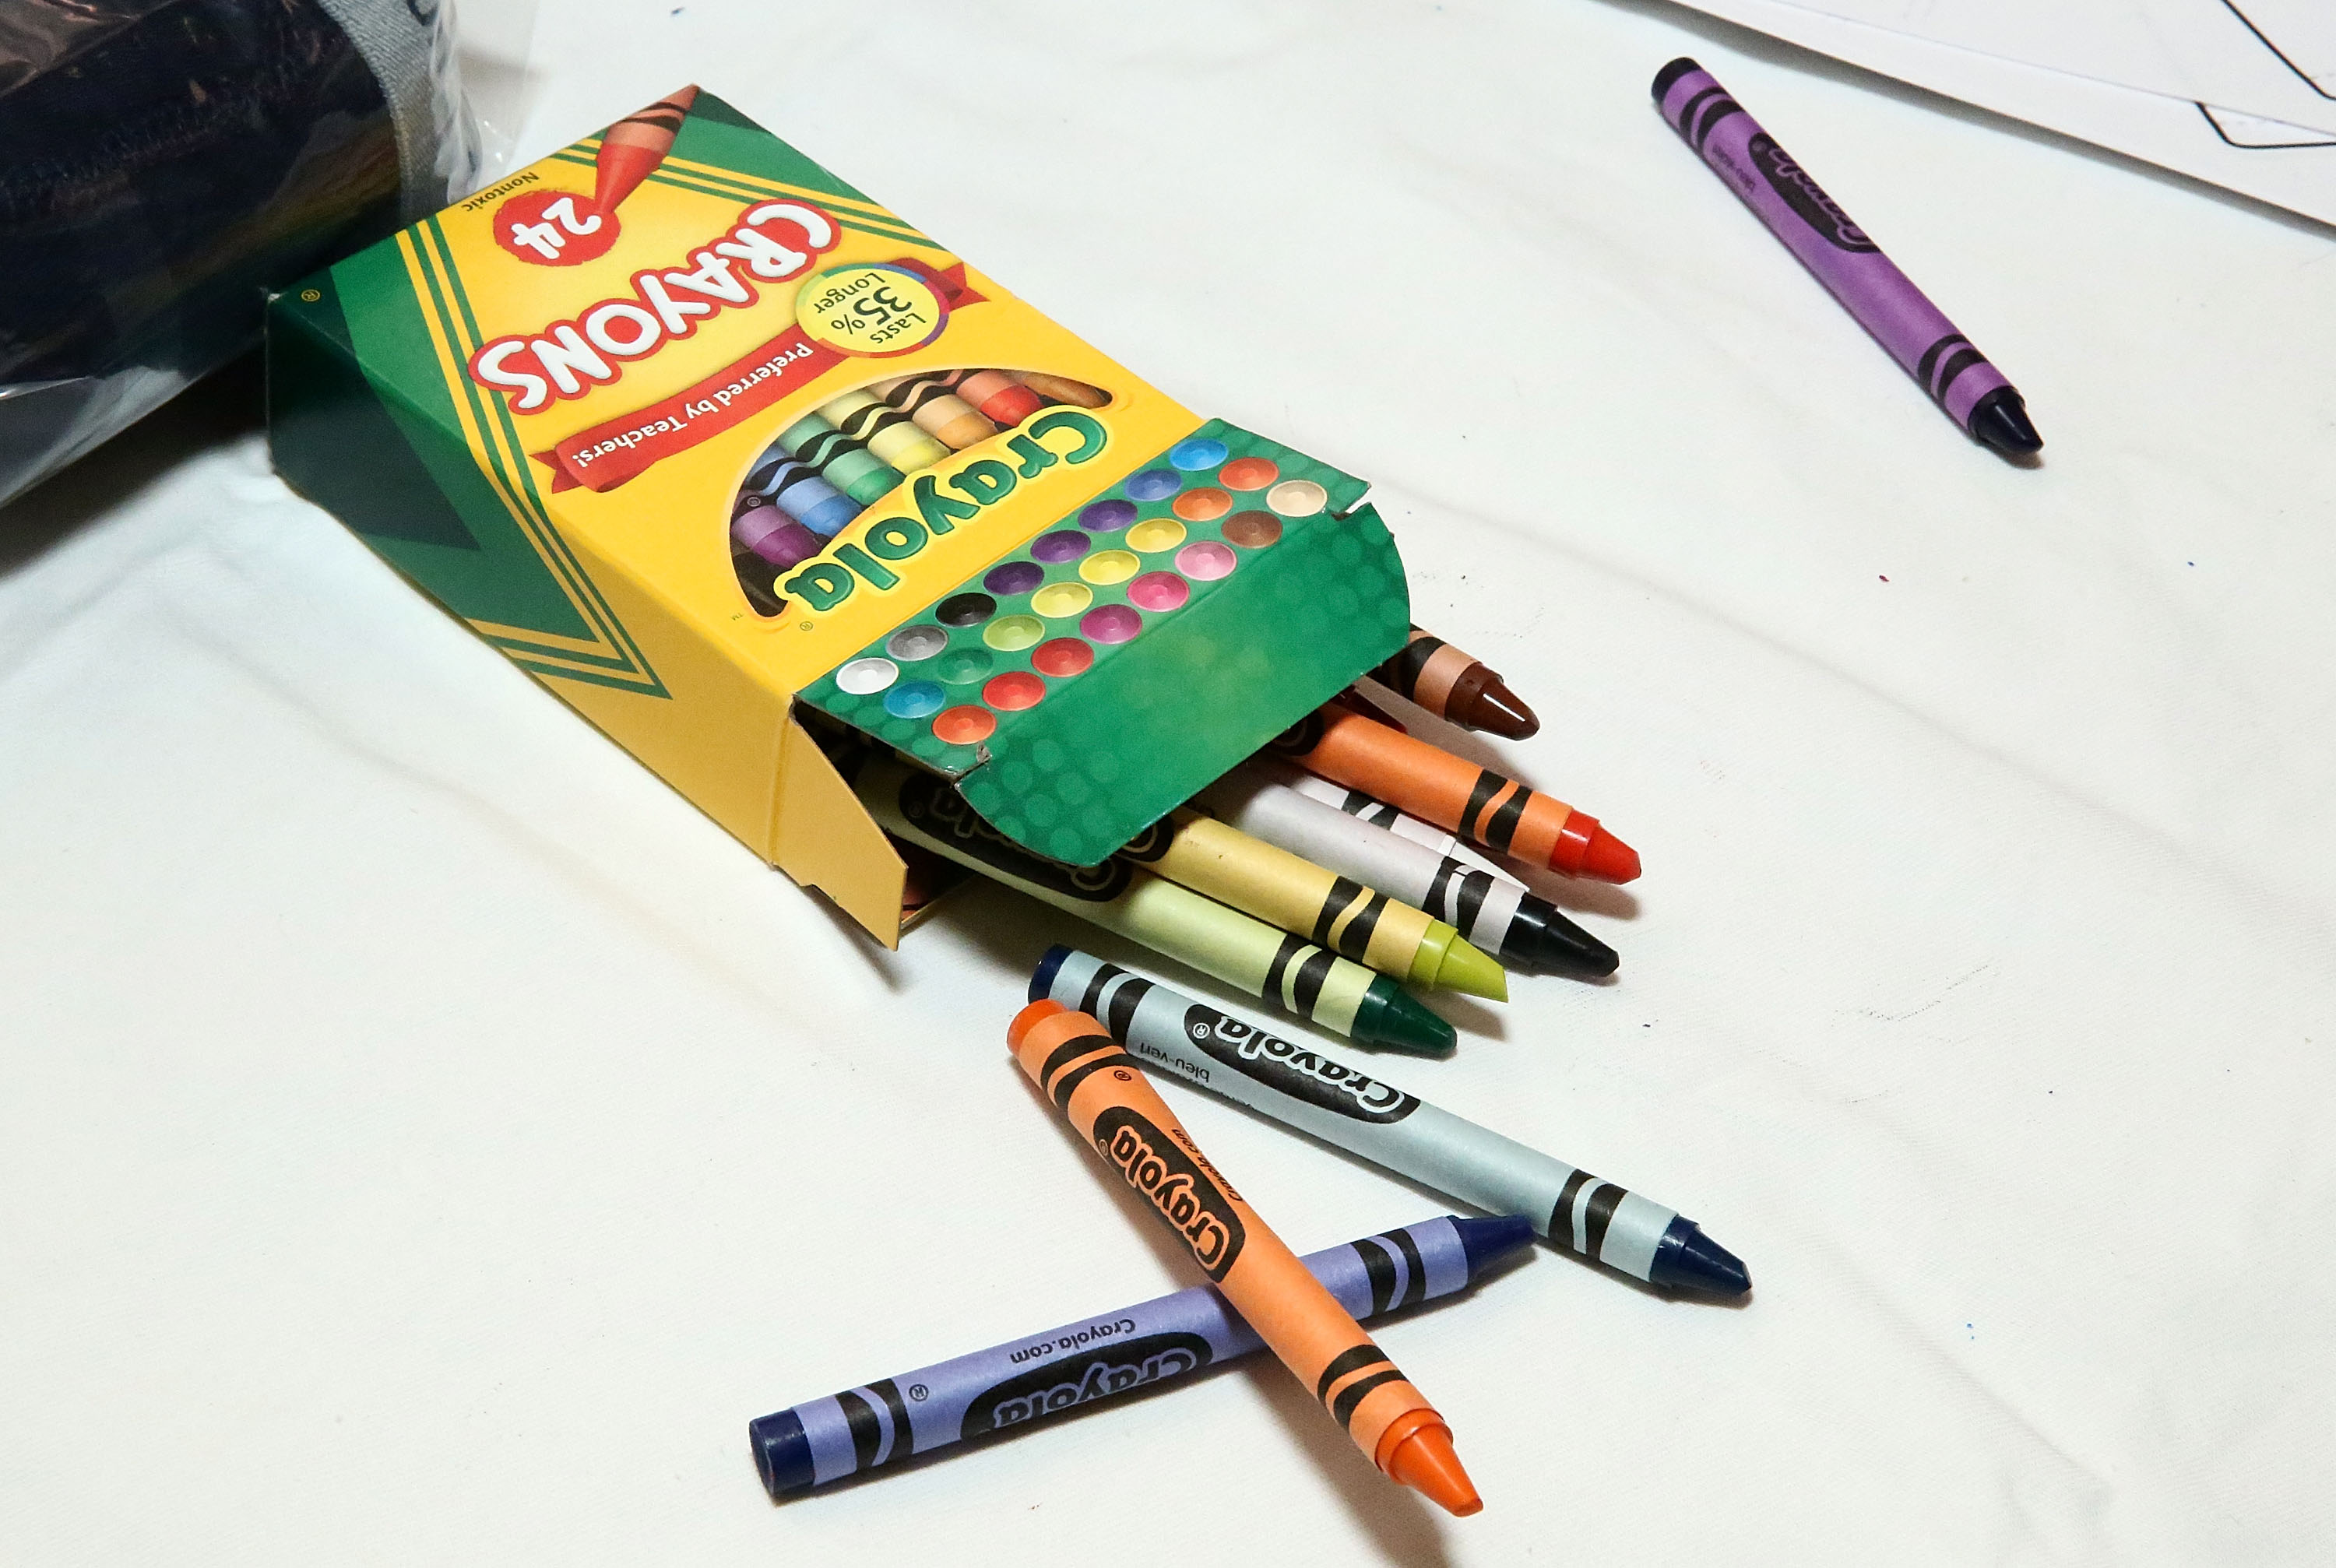 Crayola crayons are displayed at The MOMS & New York Family Magazine Cover Party at 100 Barclay on August 16, 2016 in New York City. (Astrid Stawiarz—Getty Images)